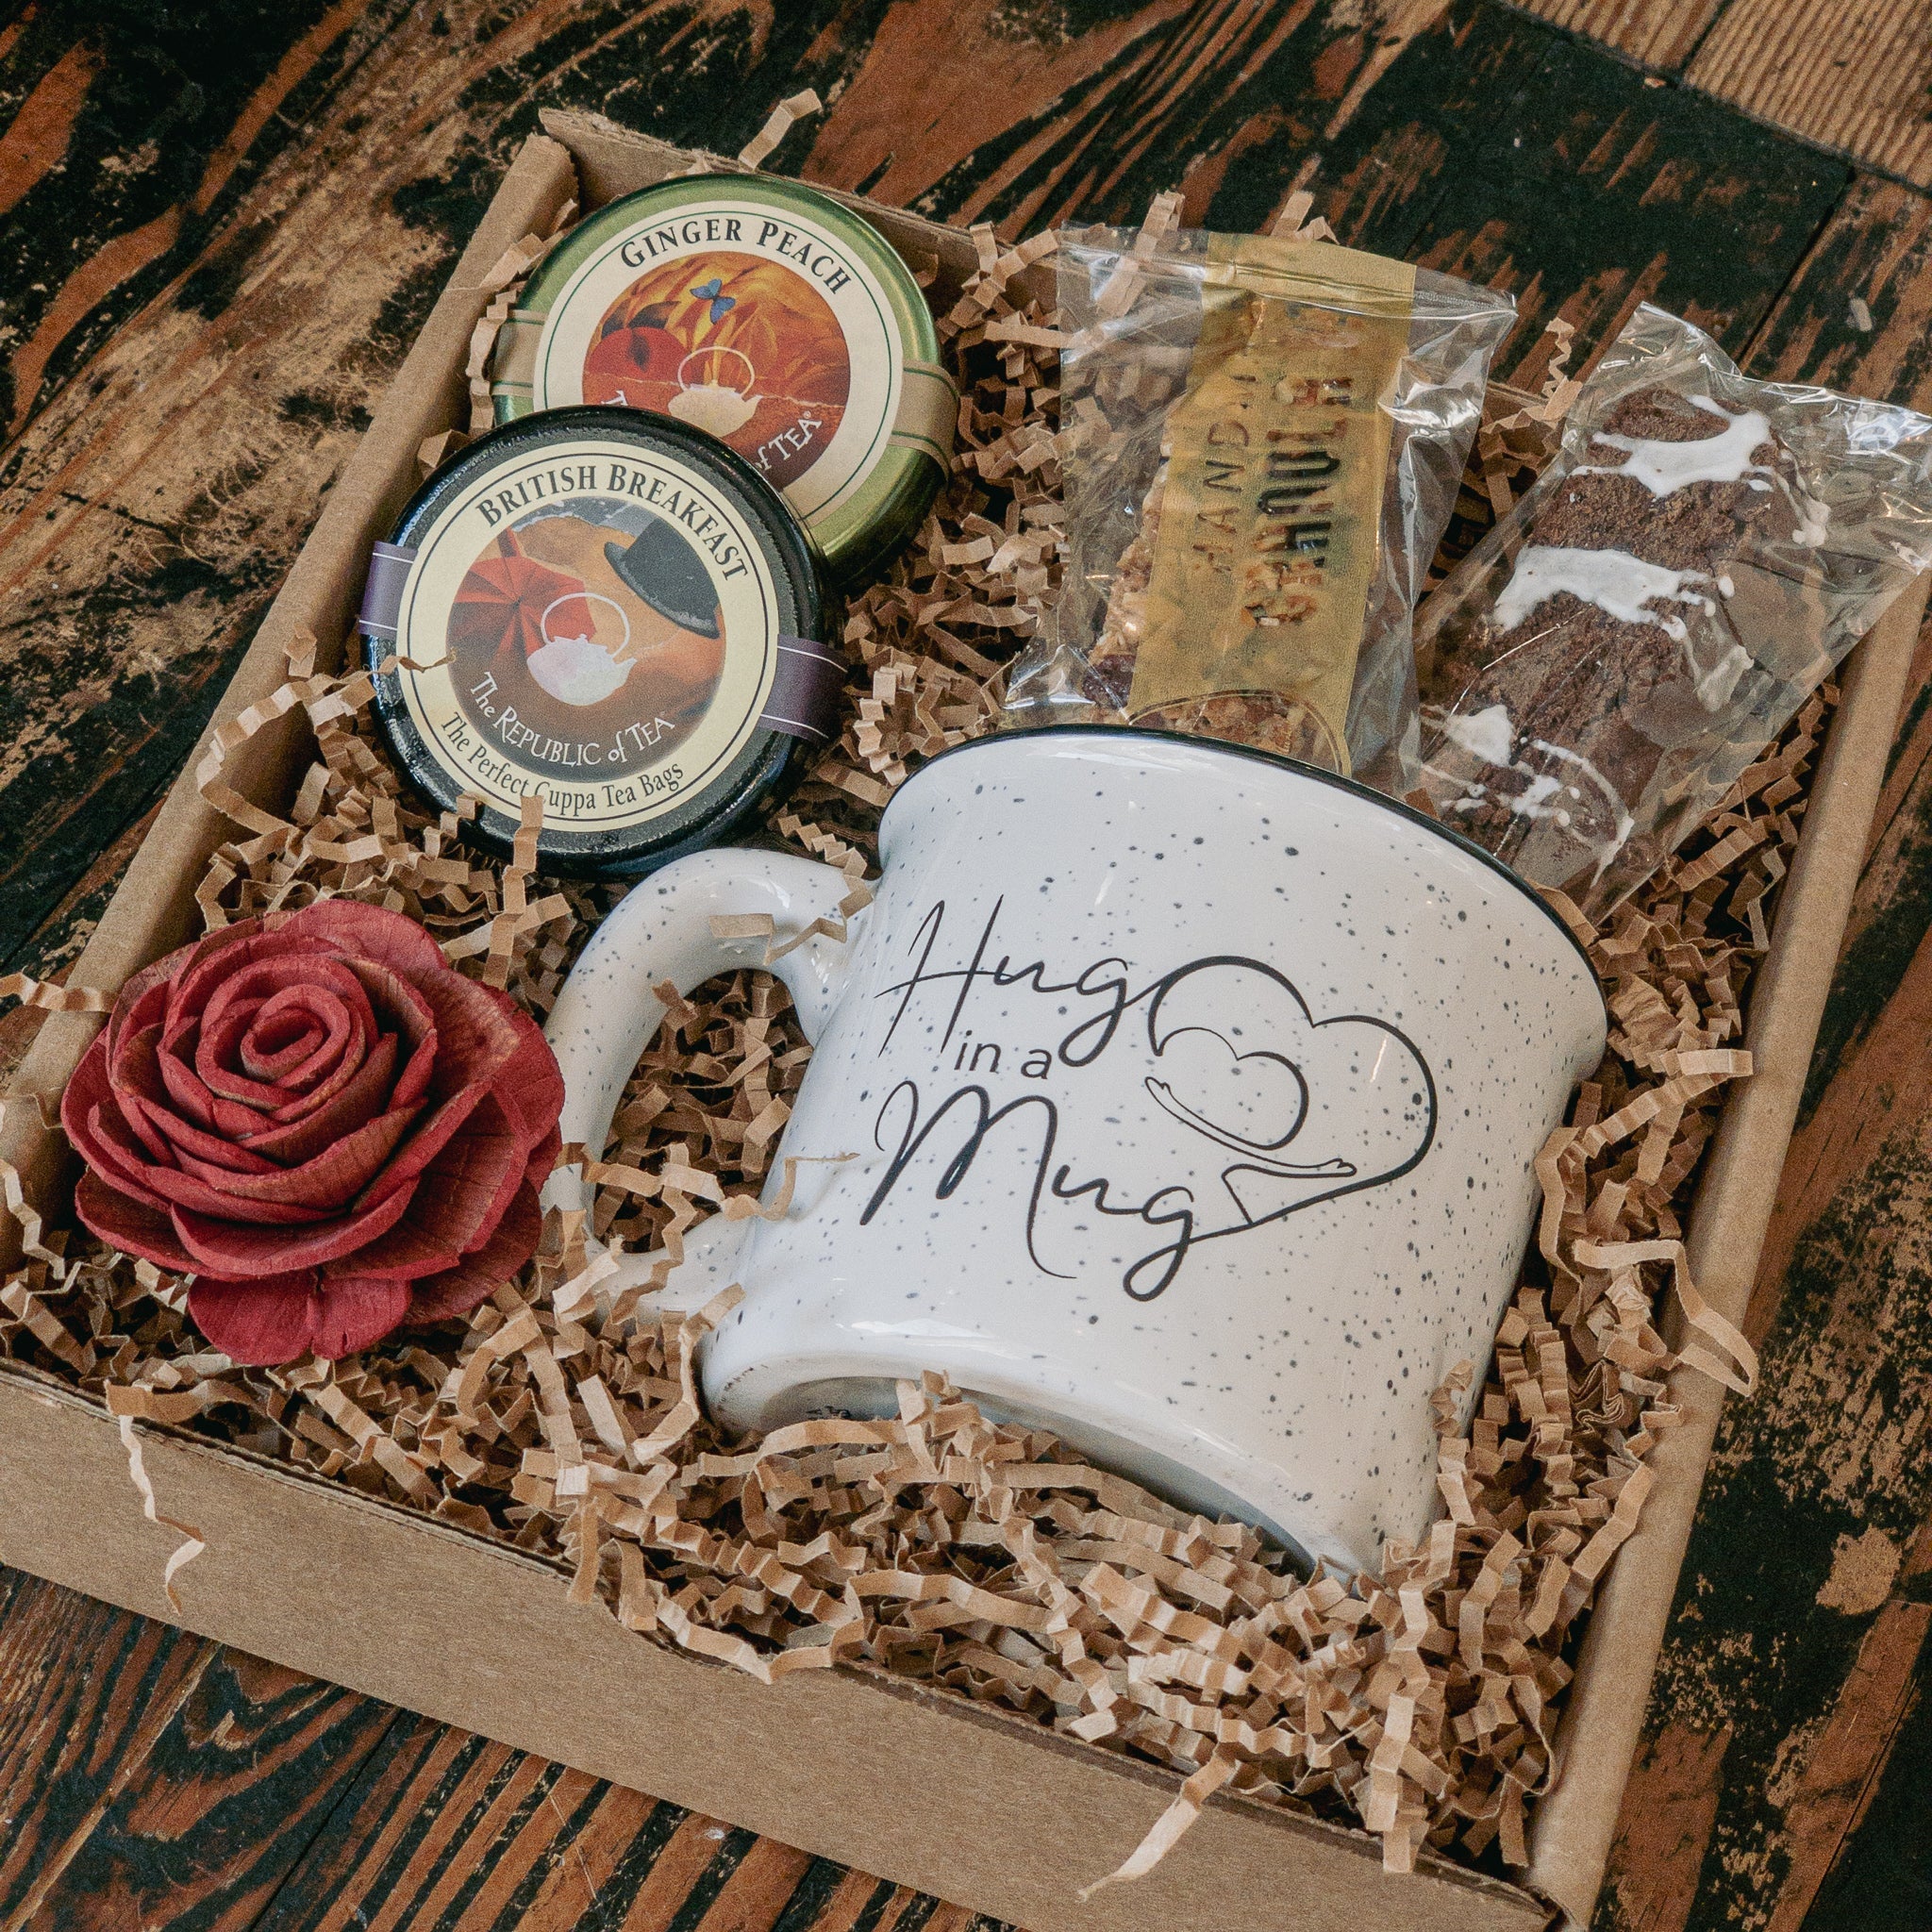 Care and Sympathy Gift Baskets - The Meeting Place on Market